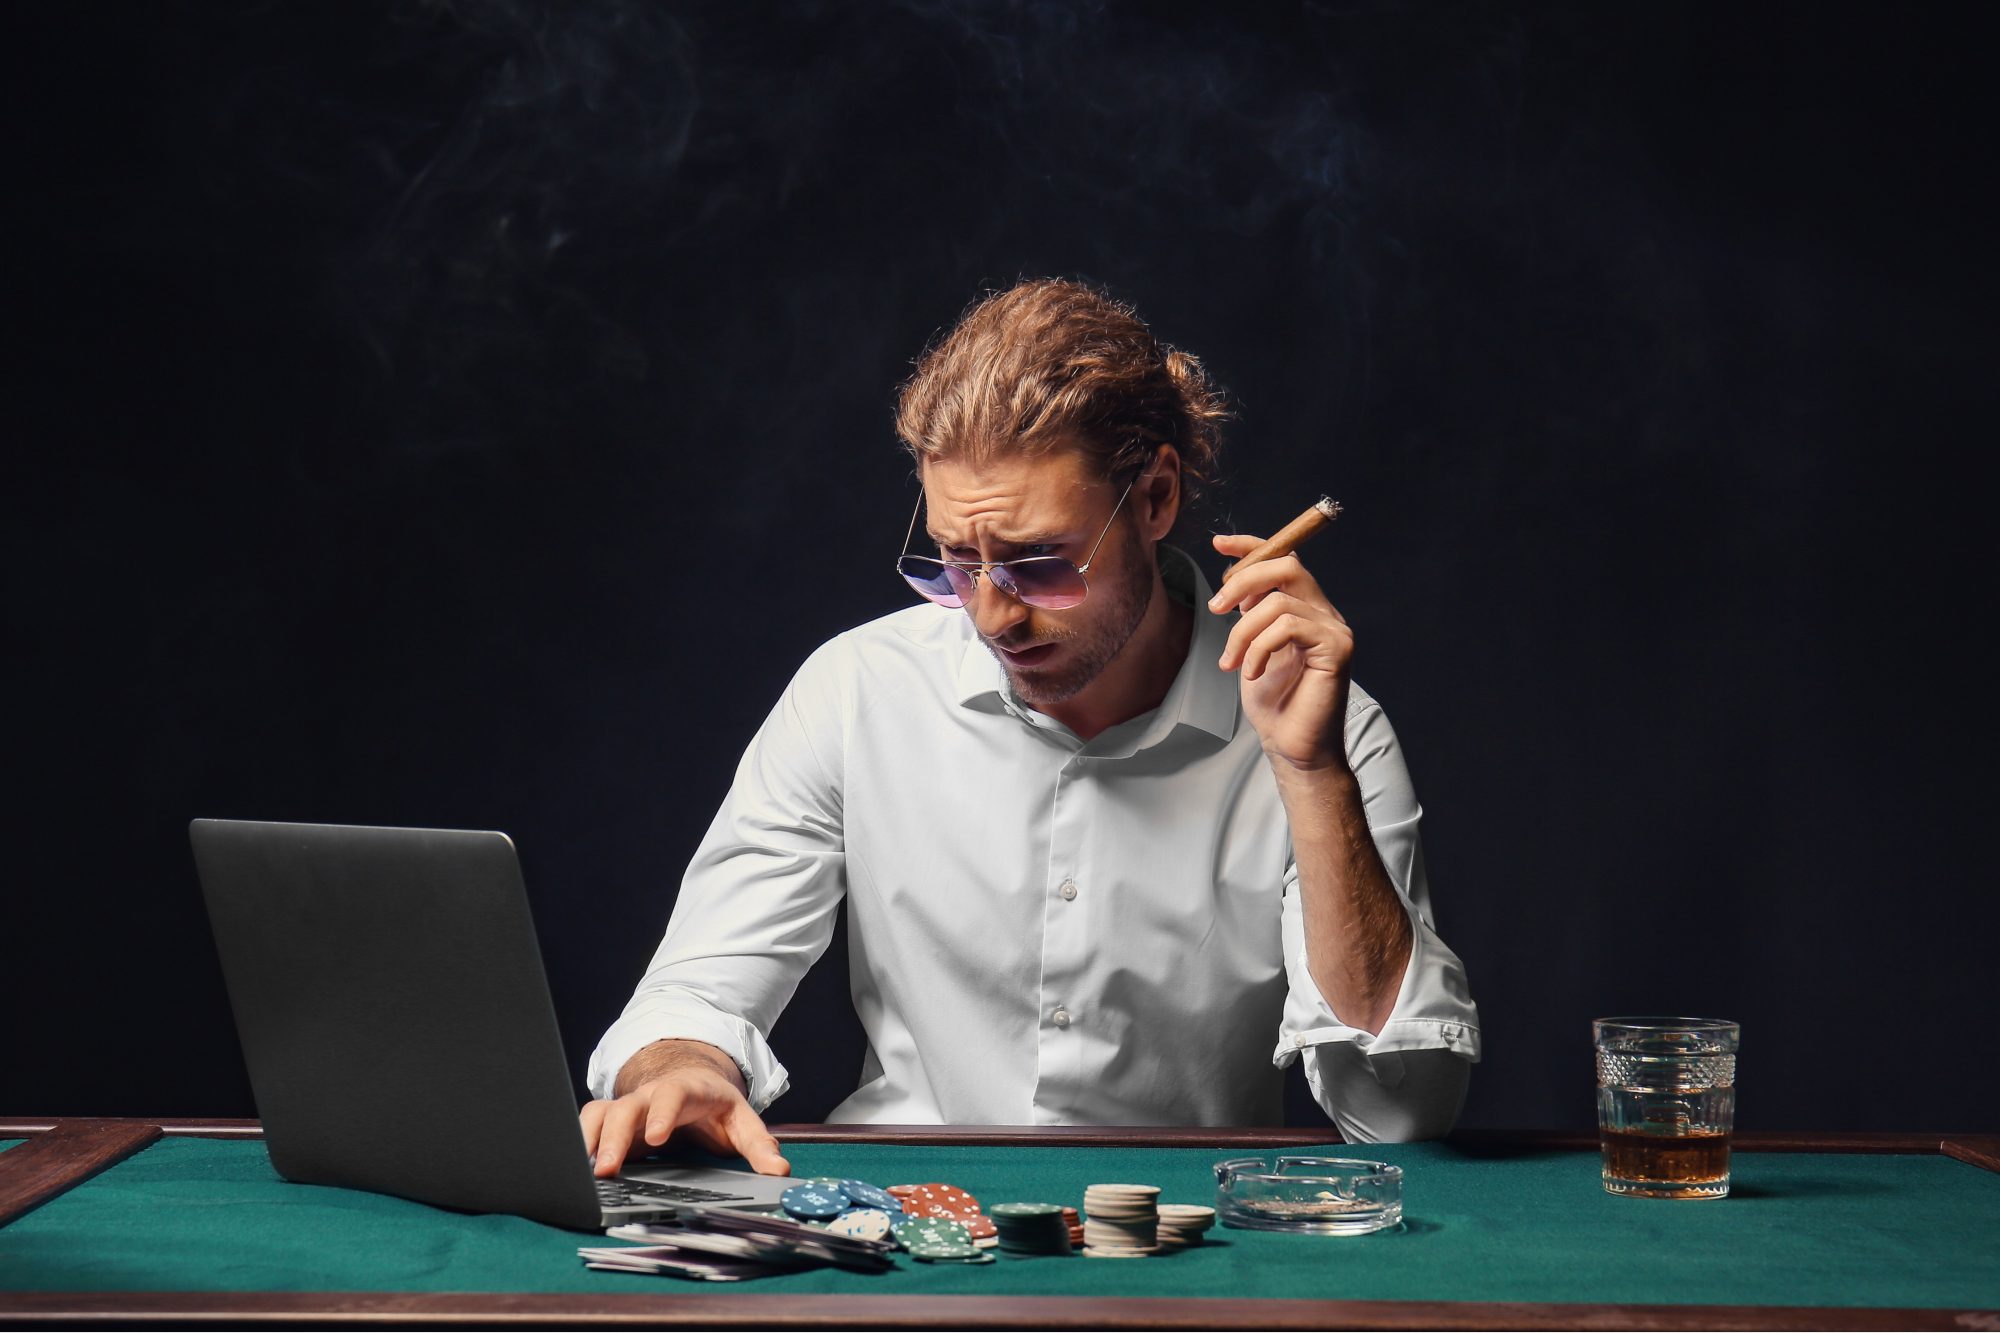 Picture of a guy focusing on online poker in front of his laptop